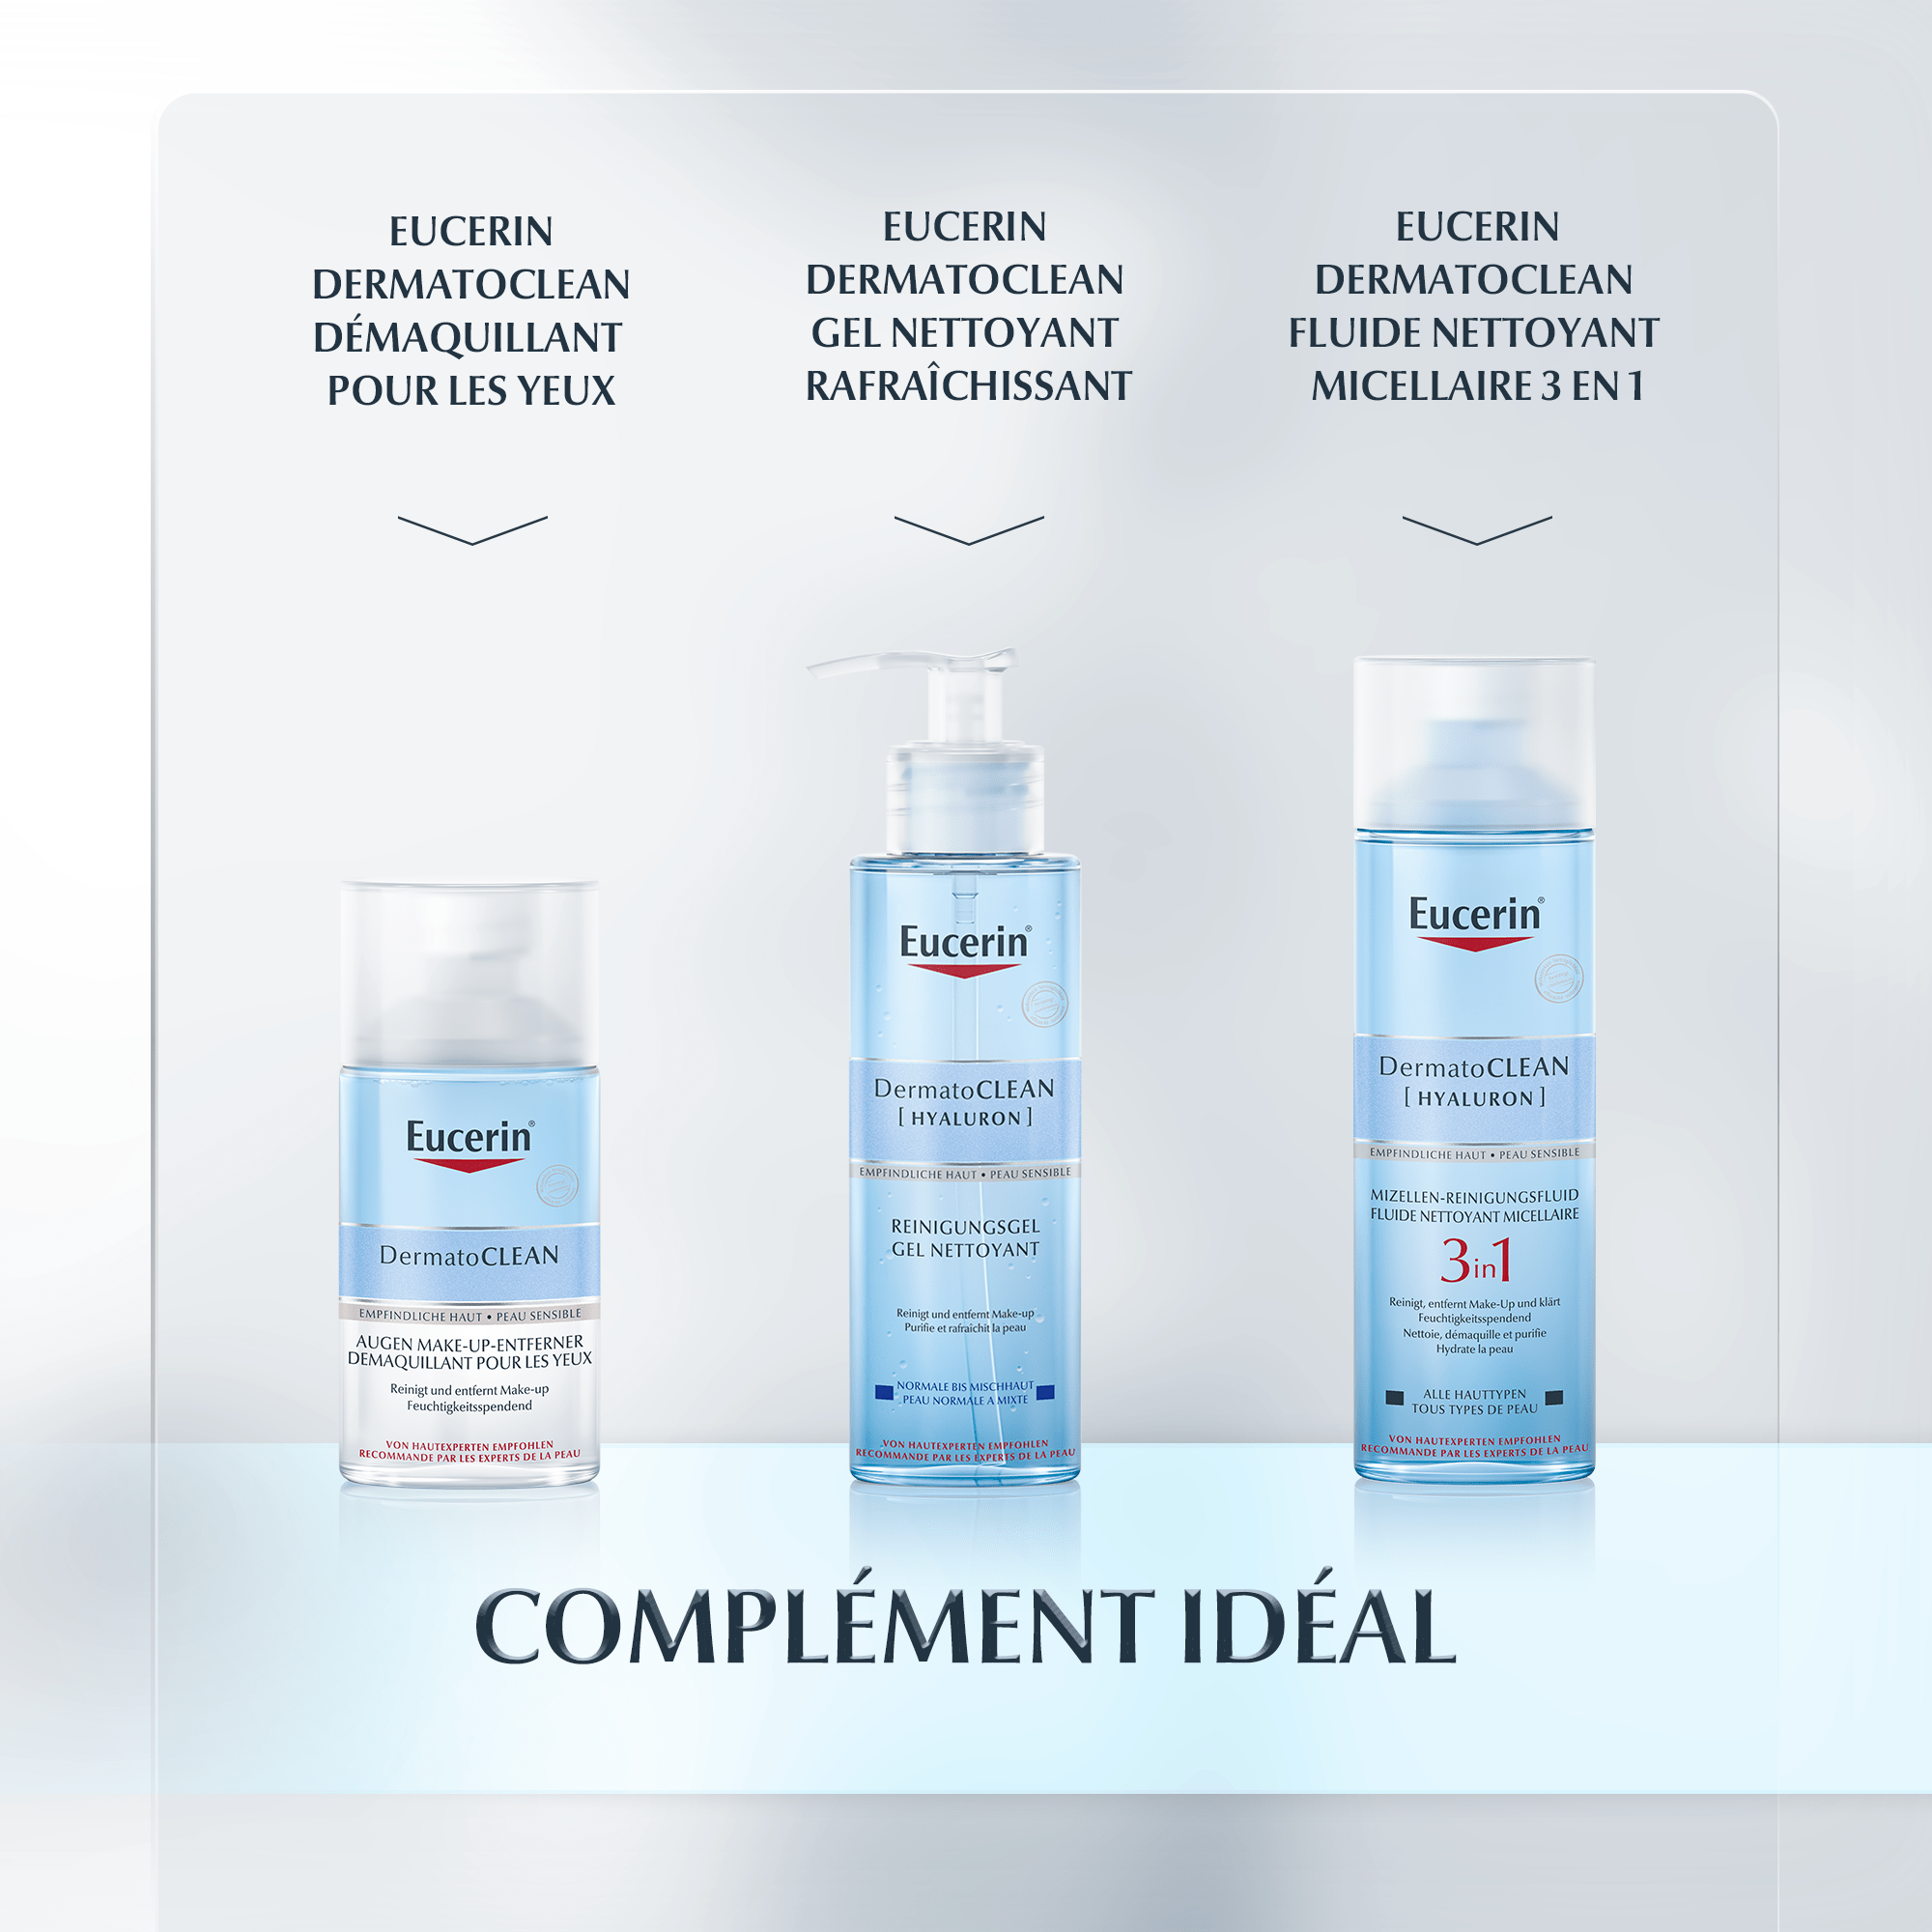 https://images-us.eucerin.com/~/media/eucerin%20relaunch%20media/eucerin/local/ch/ch-fr/products/dermato-clean/2021/dermatoclean_mild_cleansing_milk/06_cross_seling.png?rx=0&ry=0&rw=2000&rh=2000&hash=2D238330ED13FA20F986DF8263068917